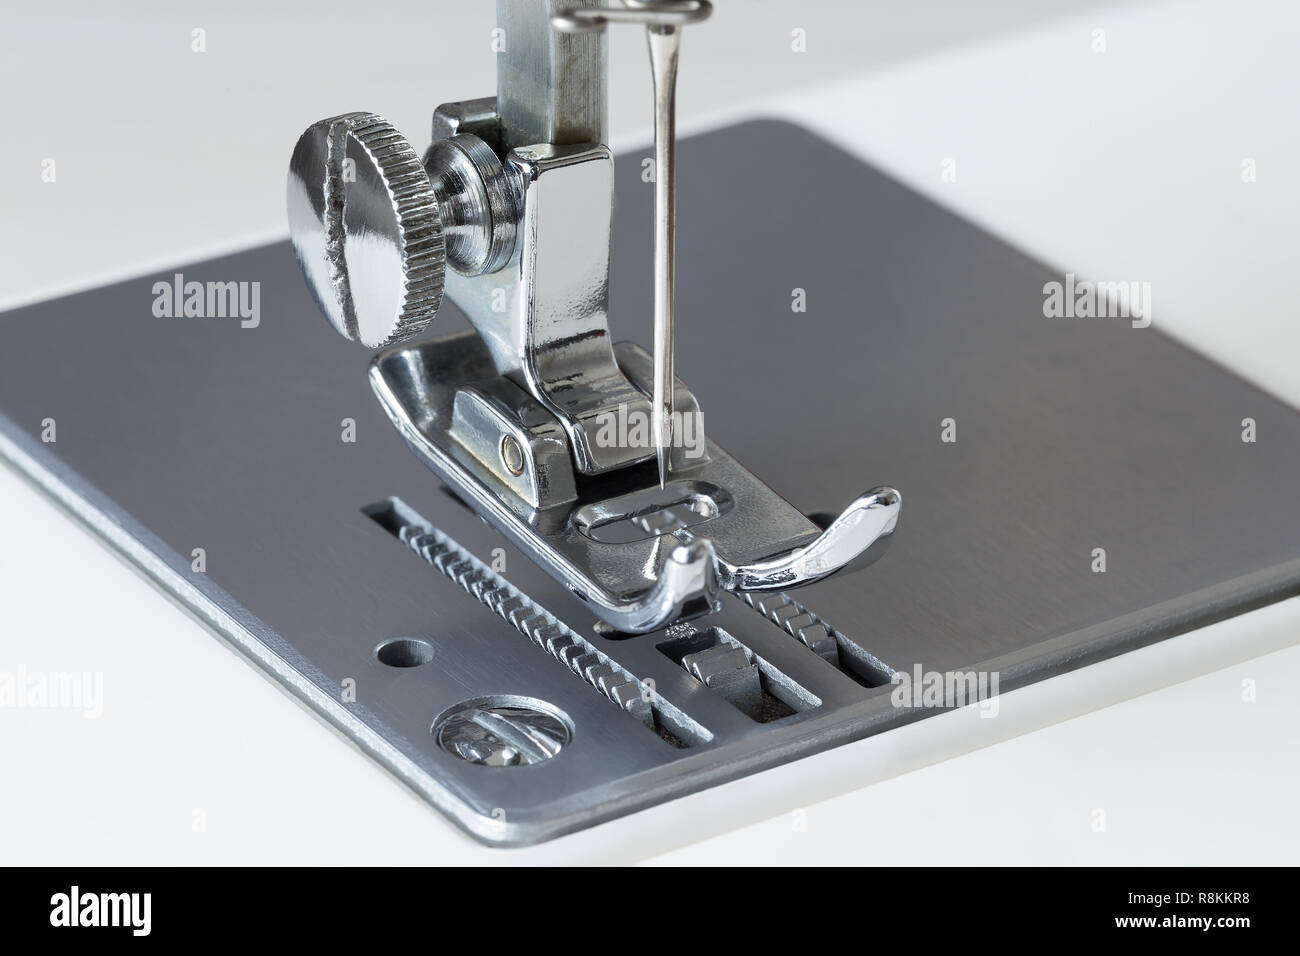 part of a sewing machine with a needle, board and rack close-up Stock Photo